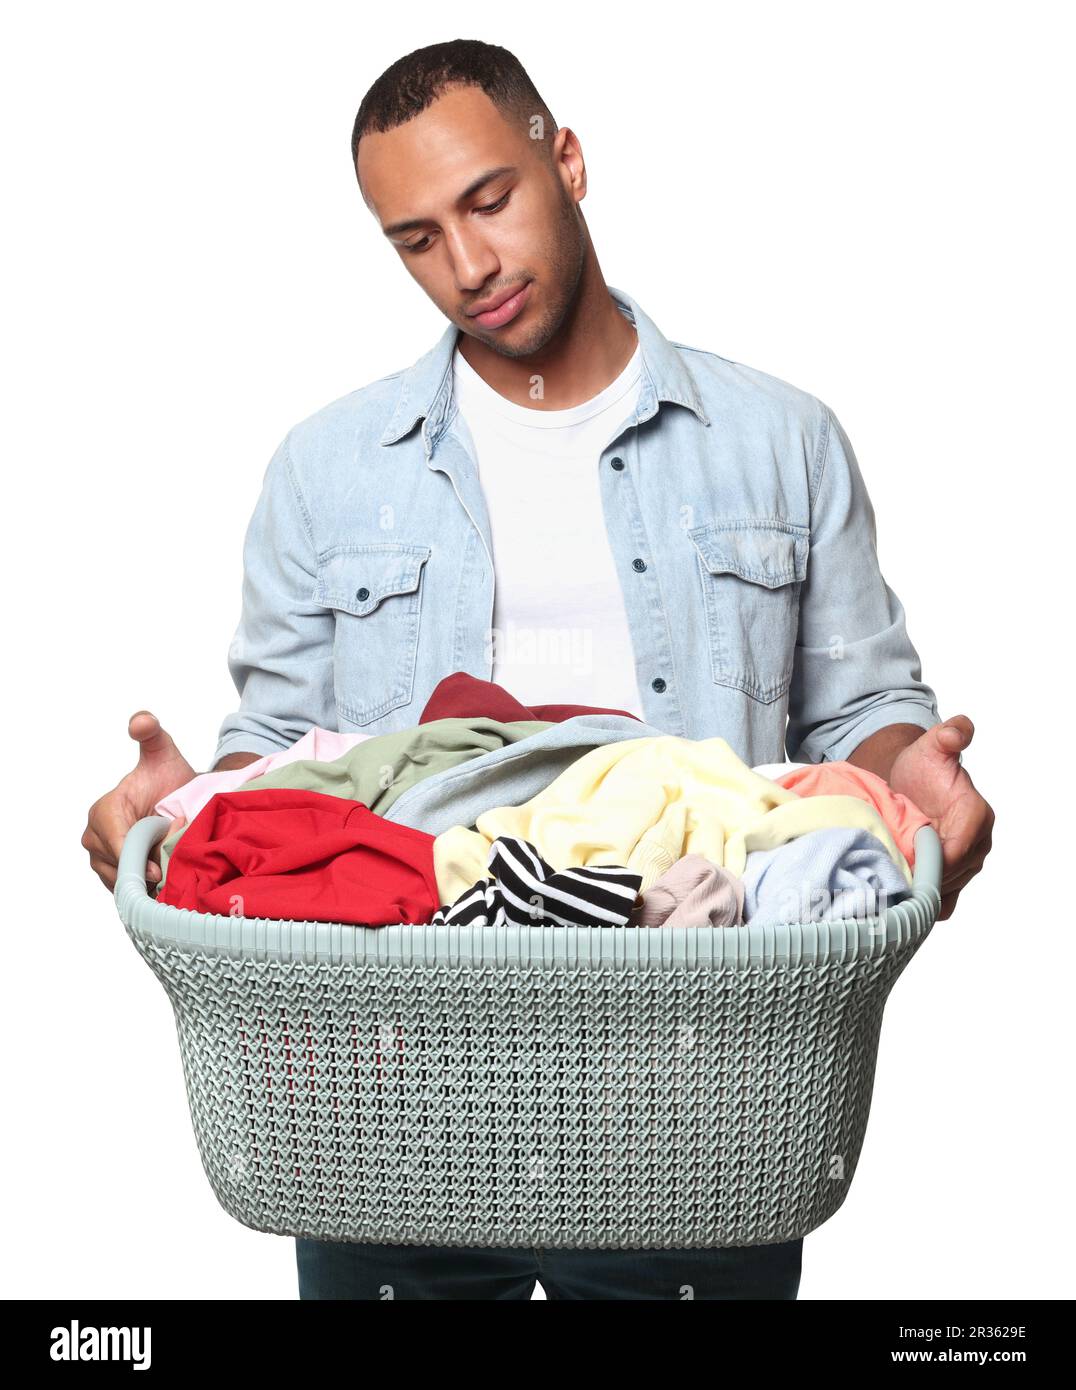 Young man with basket full of laundry on white background Stock Photo